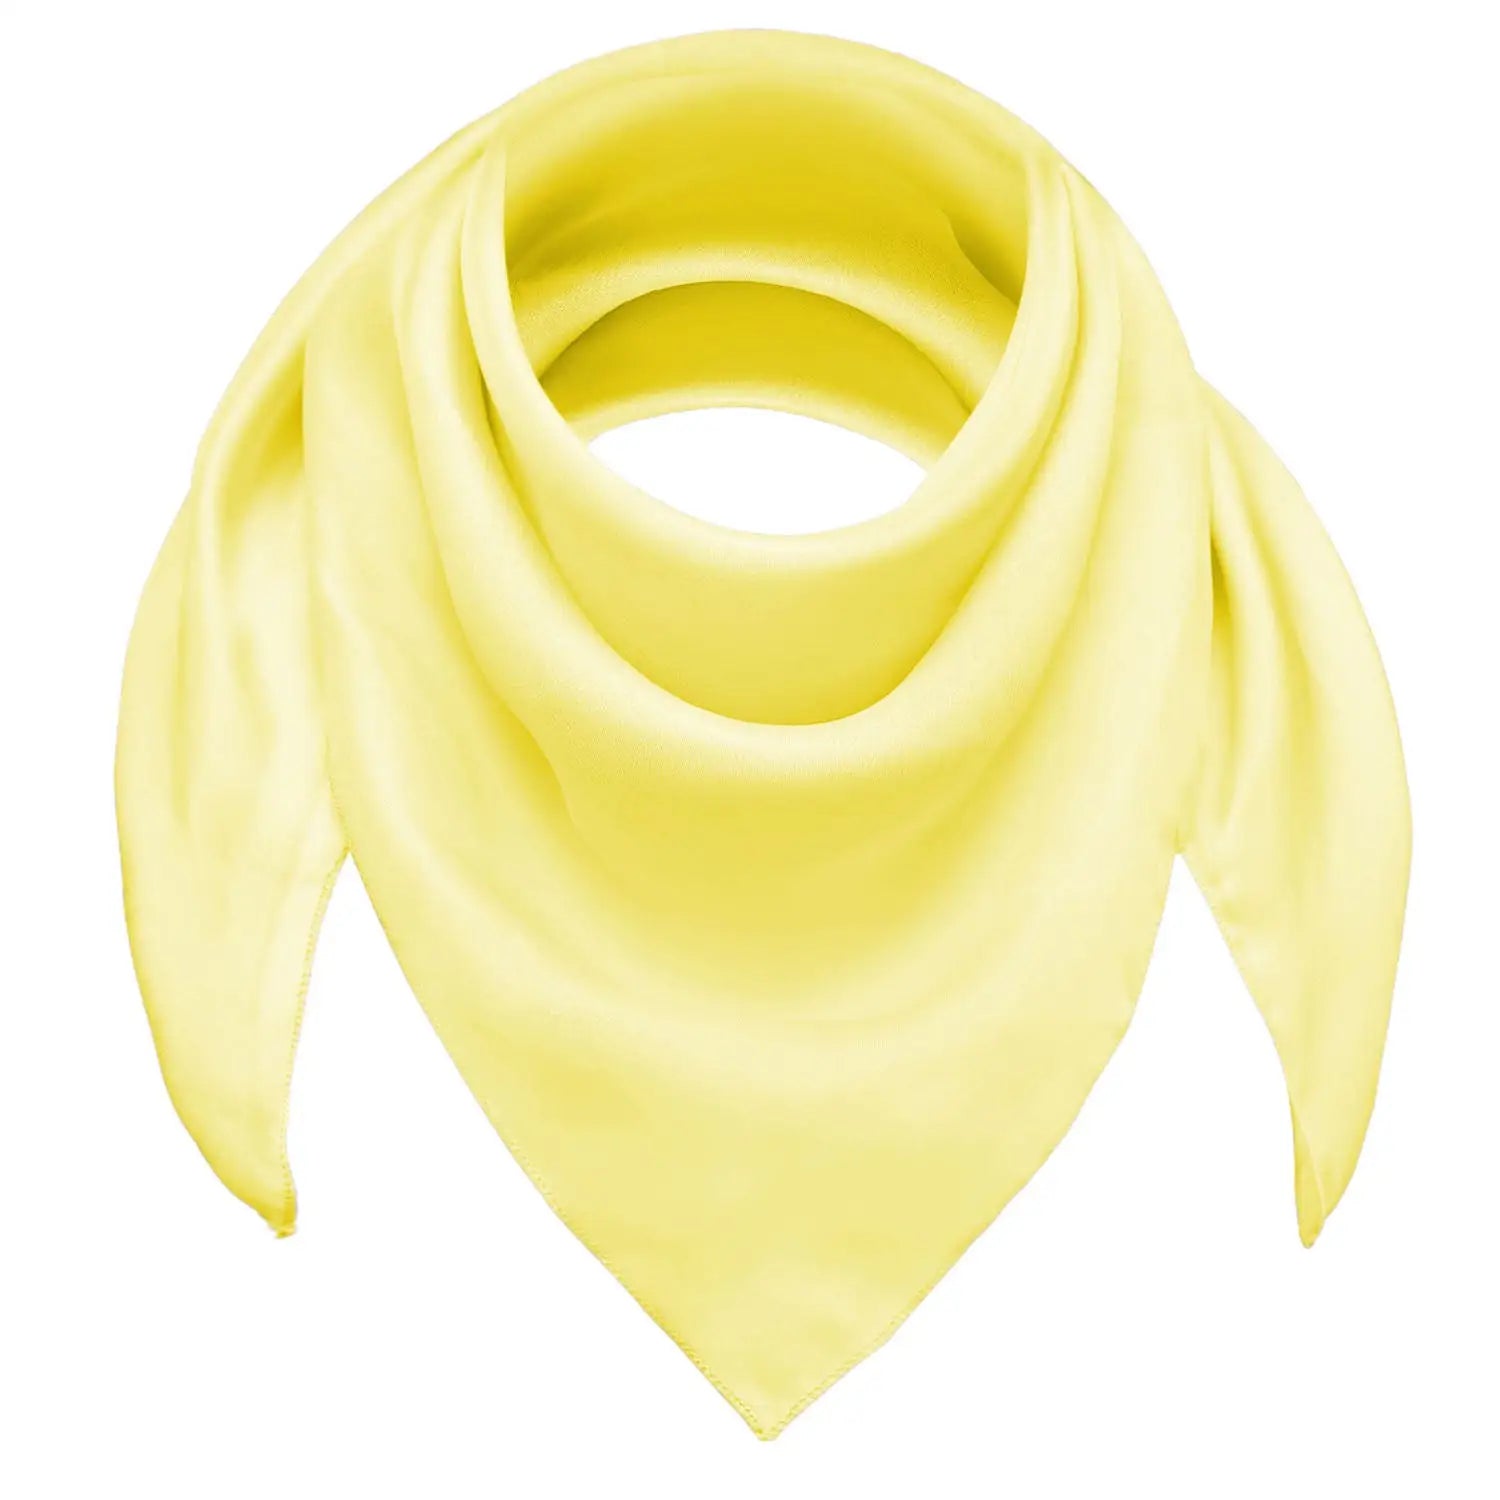 Chiffon square scarf in vibrant yellow on white background